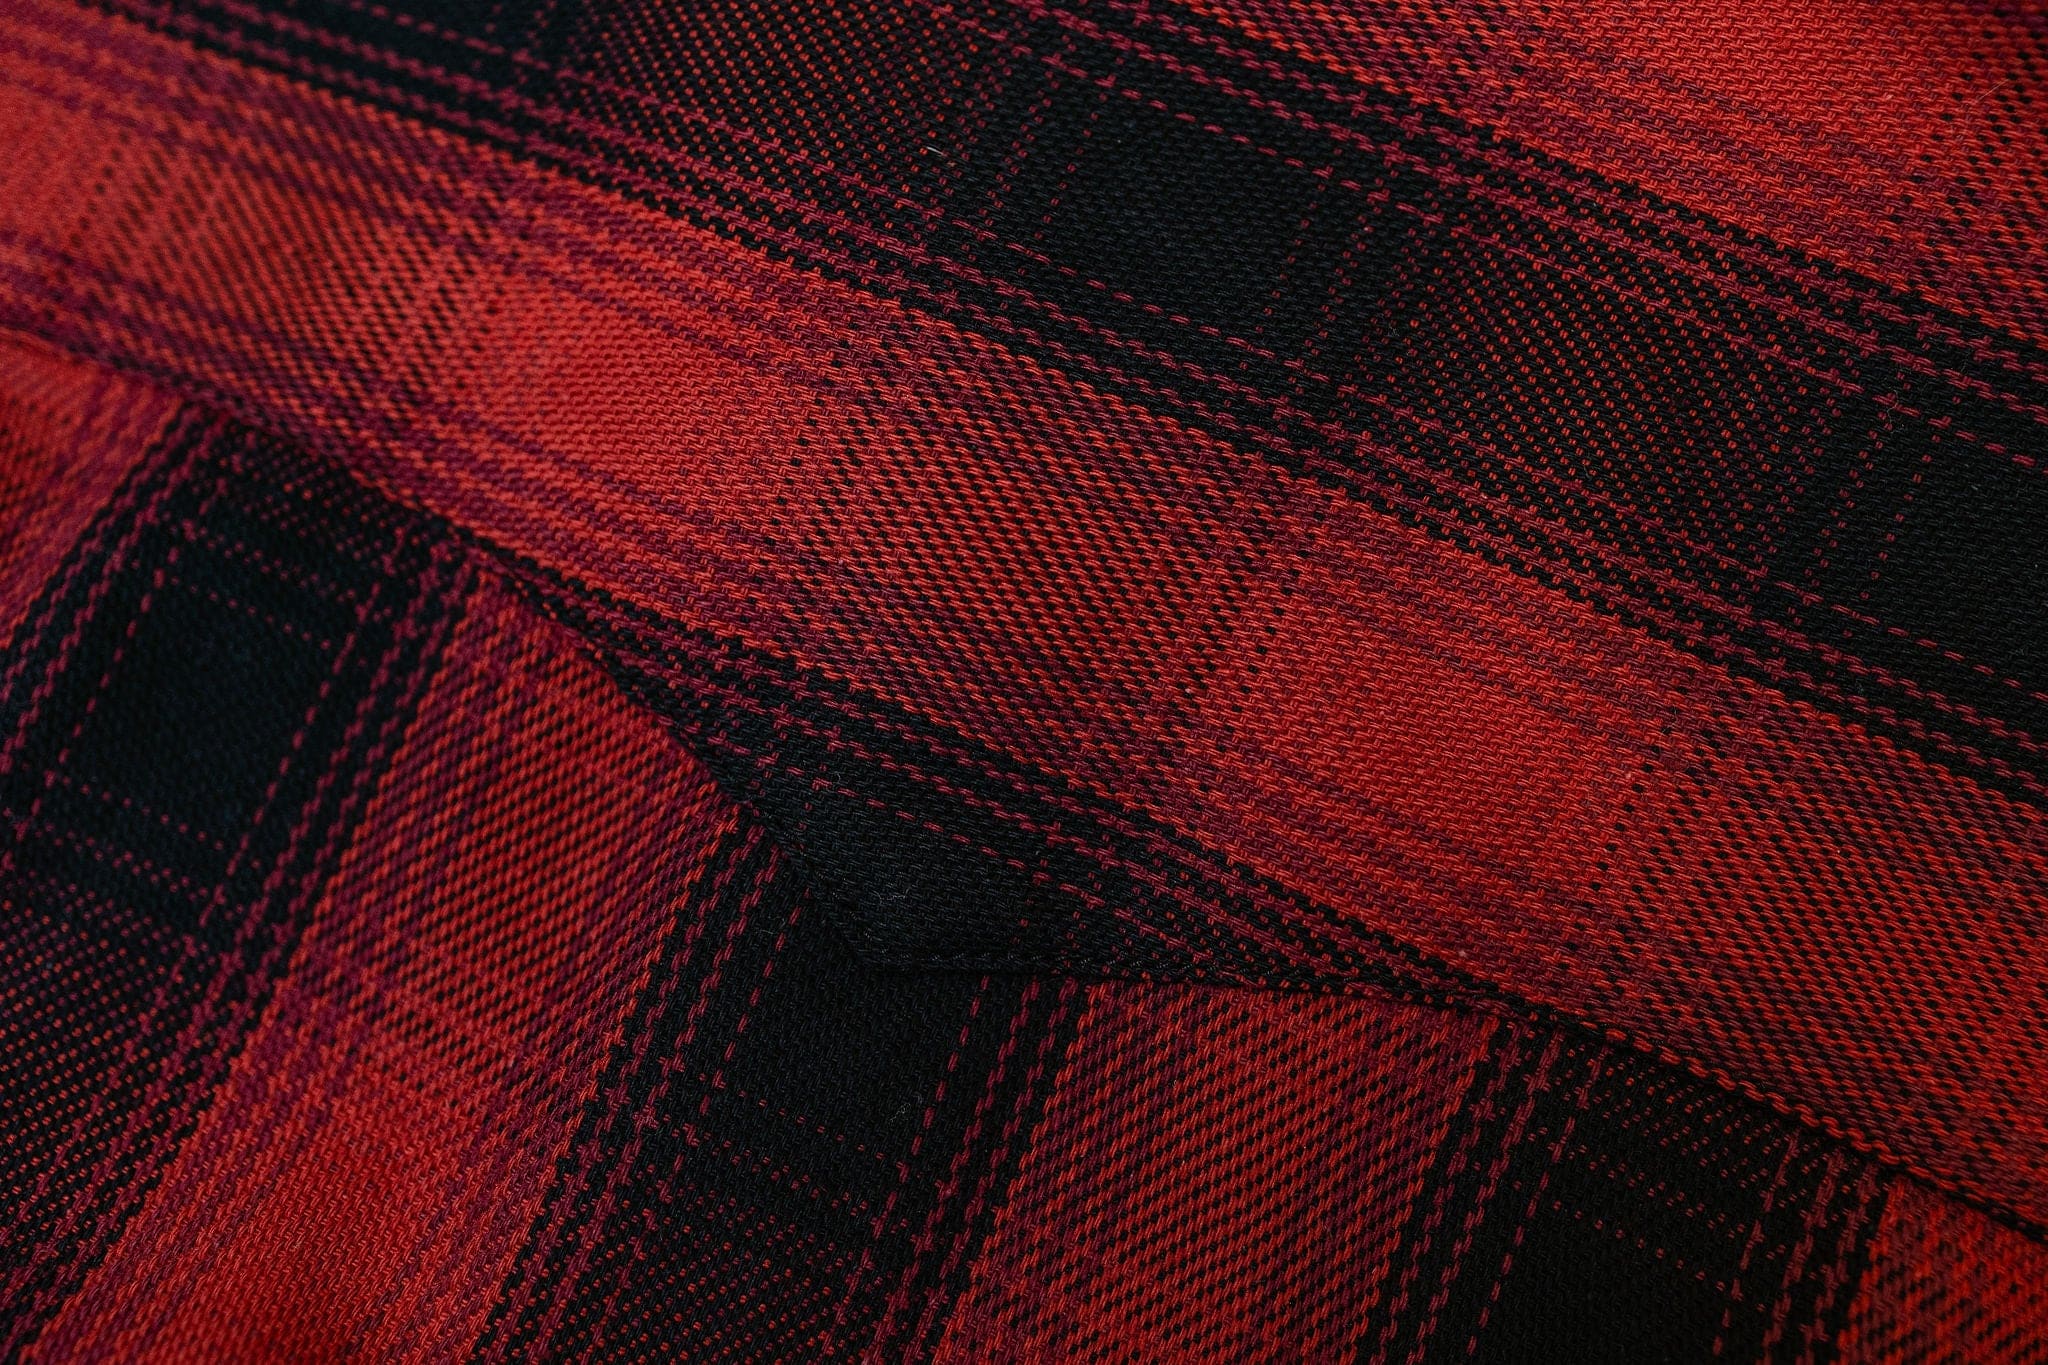 Flannel Fabric: Why & How to Determine Great Quality